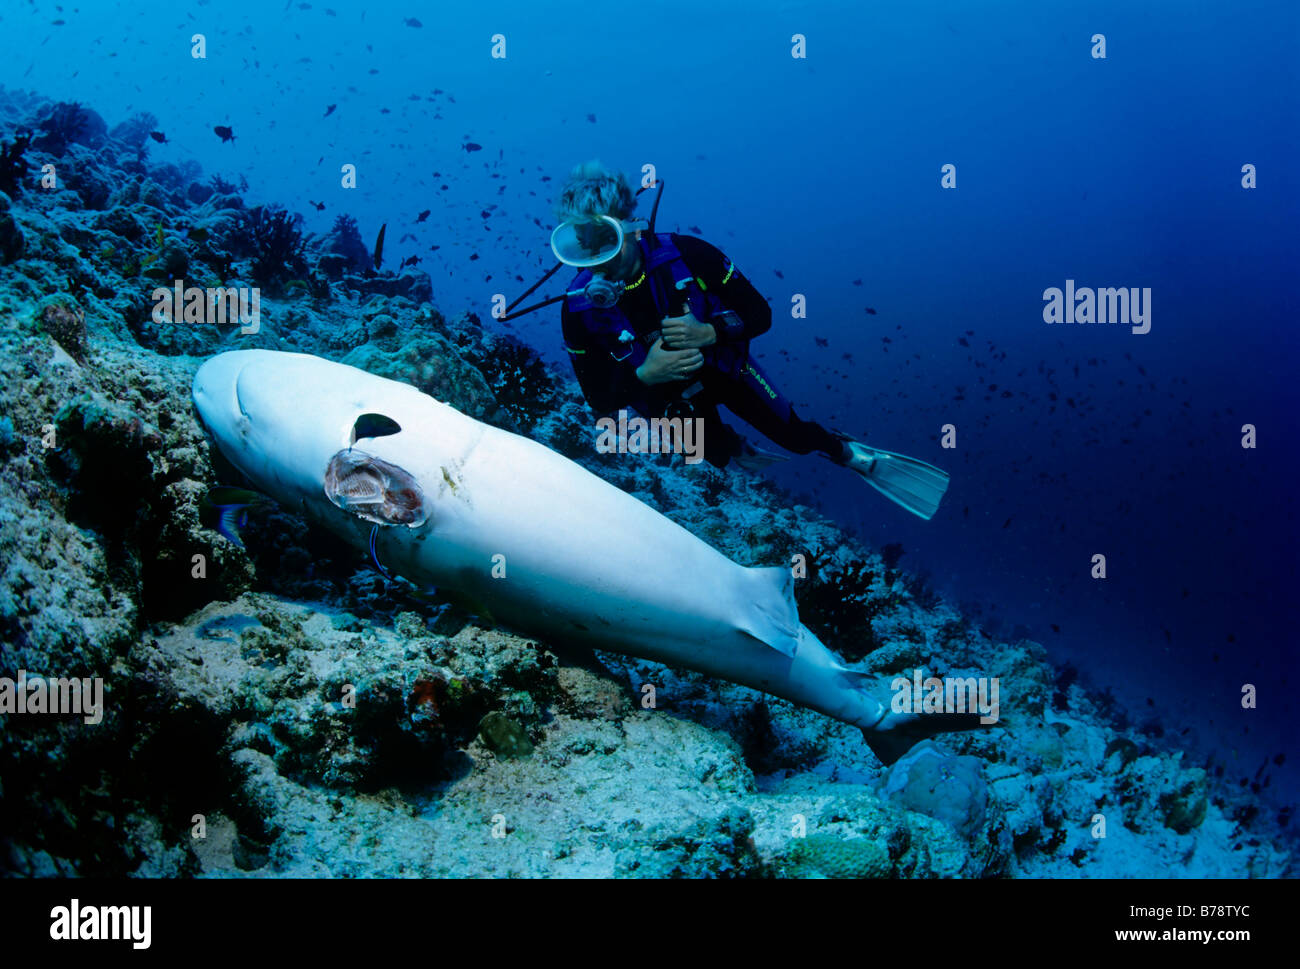 Scuba diver observing a dead Grey Reef Shark (Carcharhinus amblyrhynchos) with cut-off fins on a coral reef, Lhaviyani Atoll, M Stock Photo